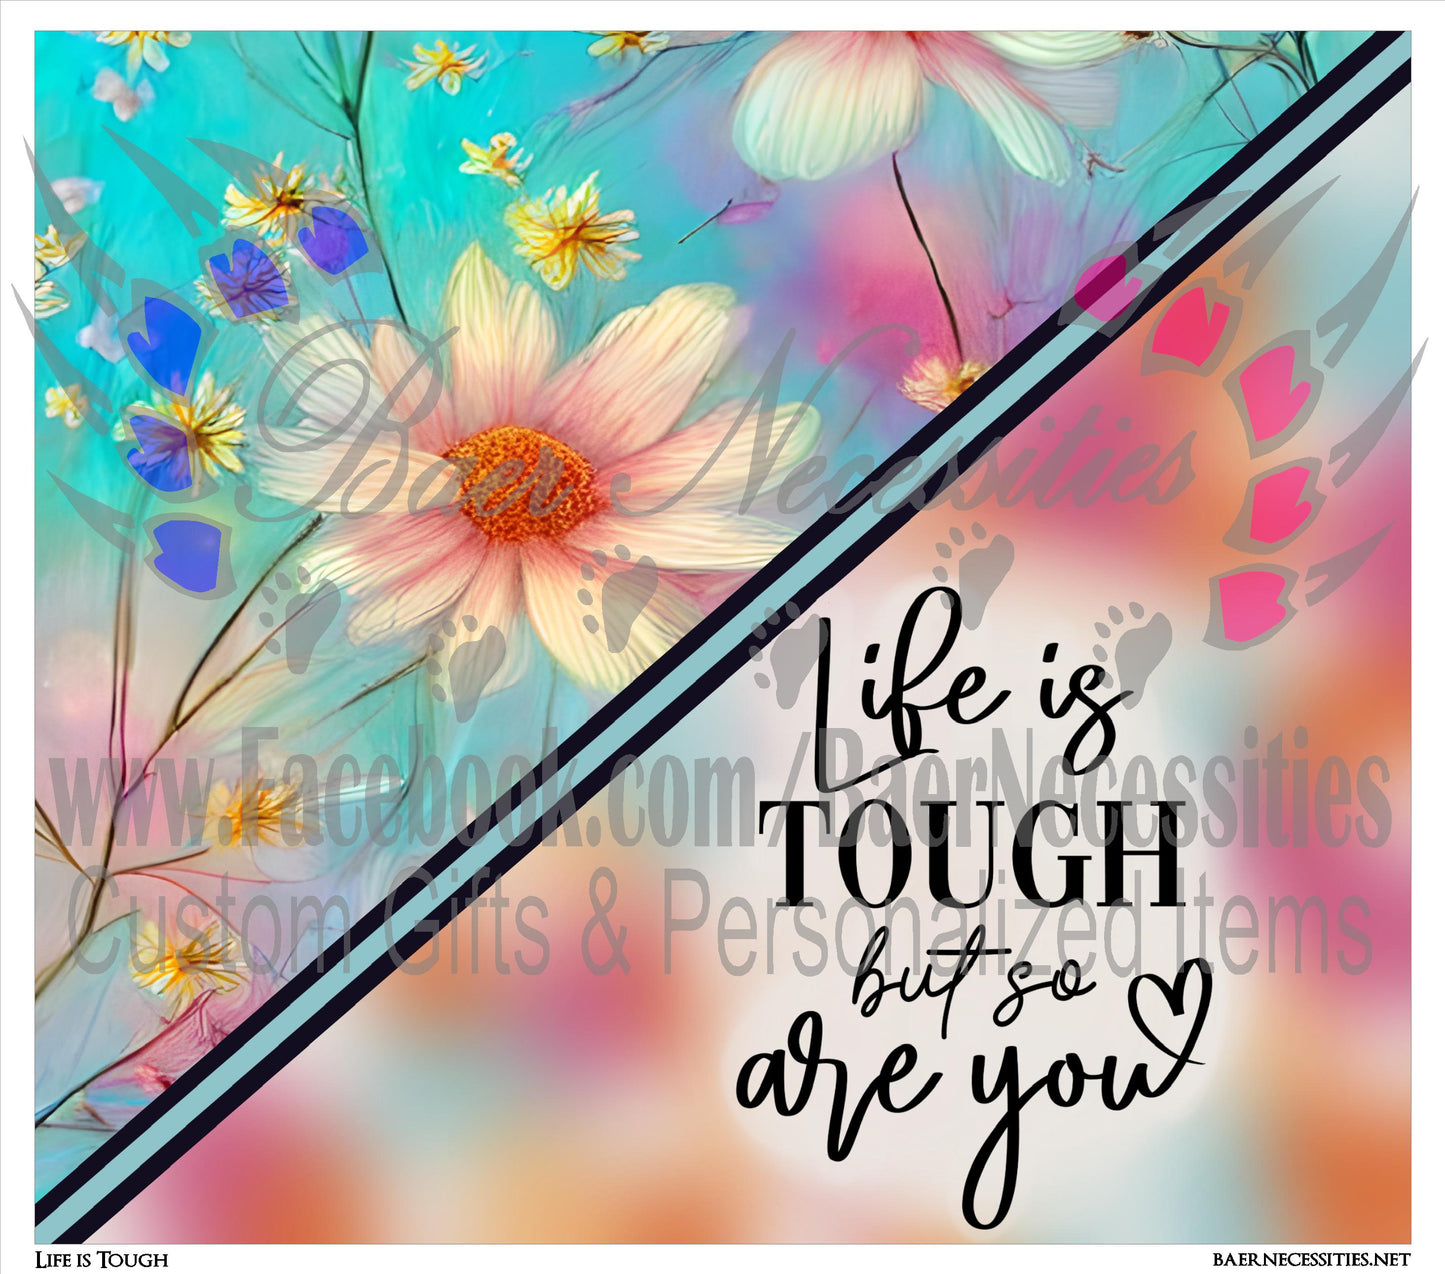 Life is Tough but so are You - Full Wrap